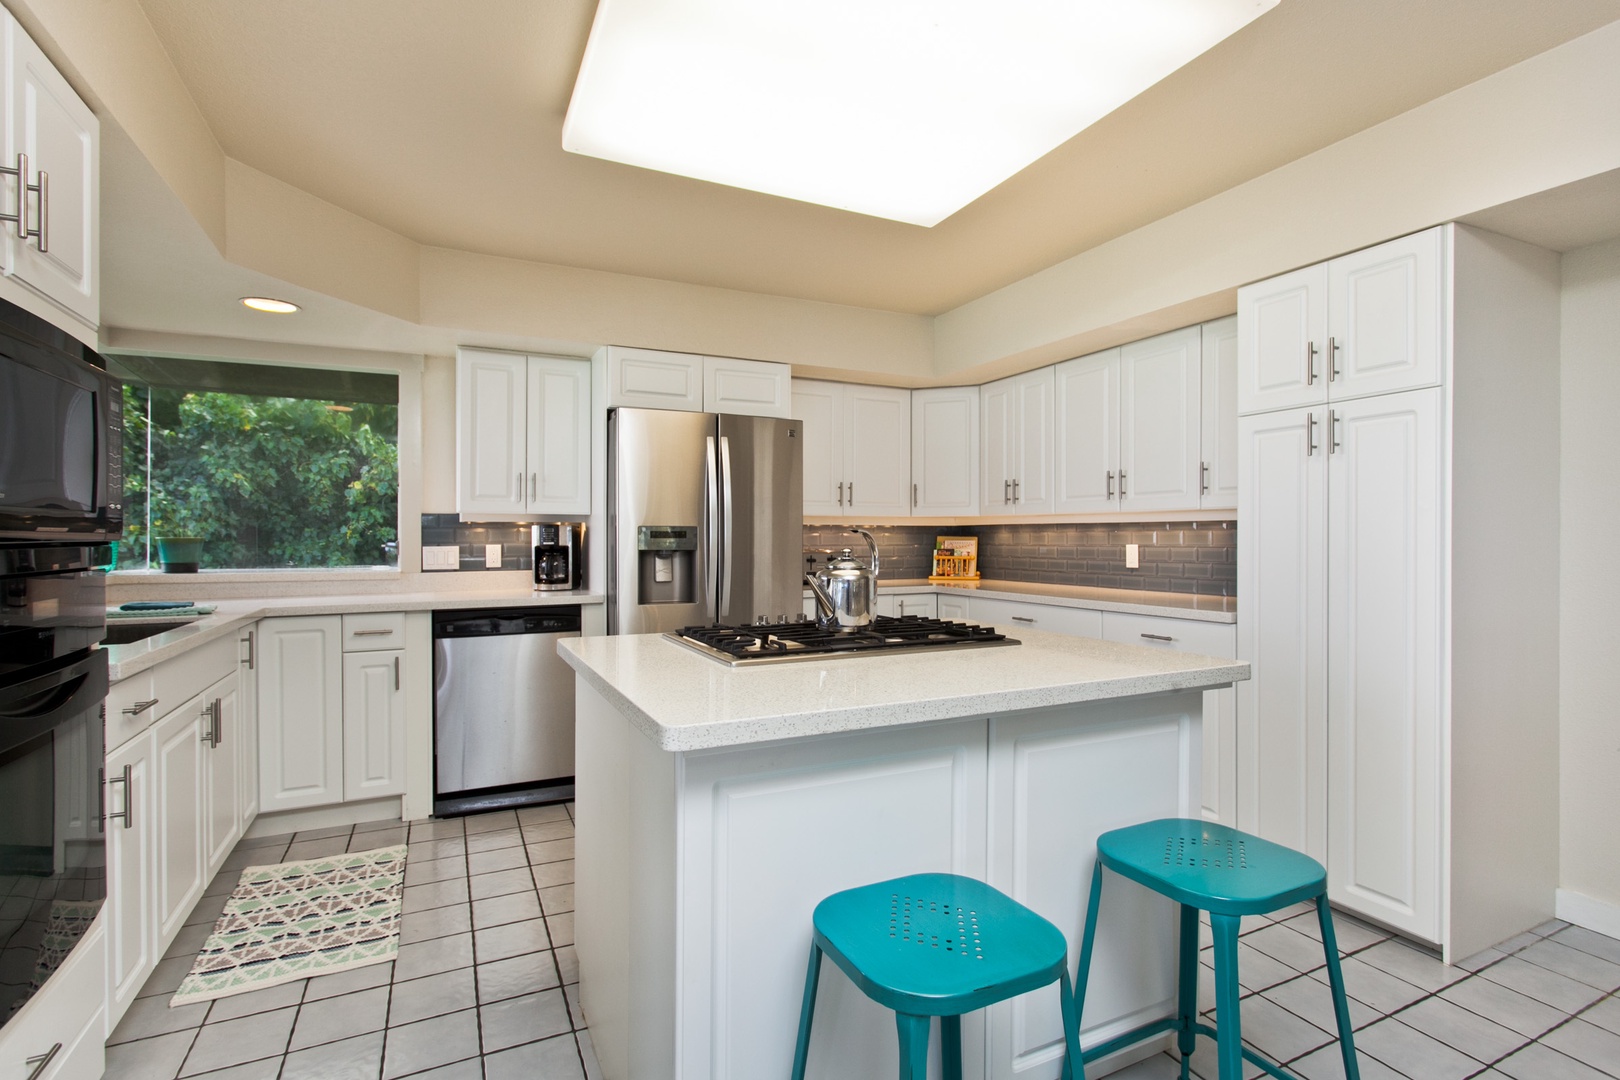 Kailua Vacation Rentals, Lanikai Village* - Hale Kolea: Kitchen area with stainless steel appliances and plenty of cabinets for storing your kitchen needs.